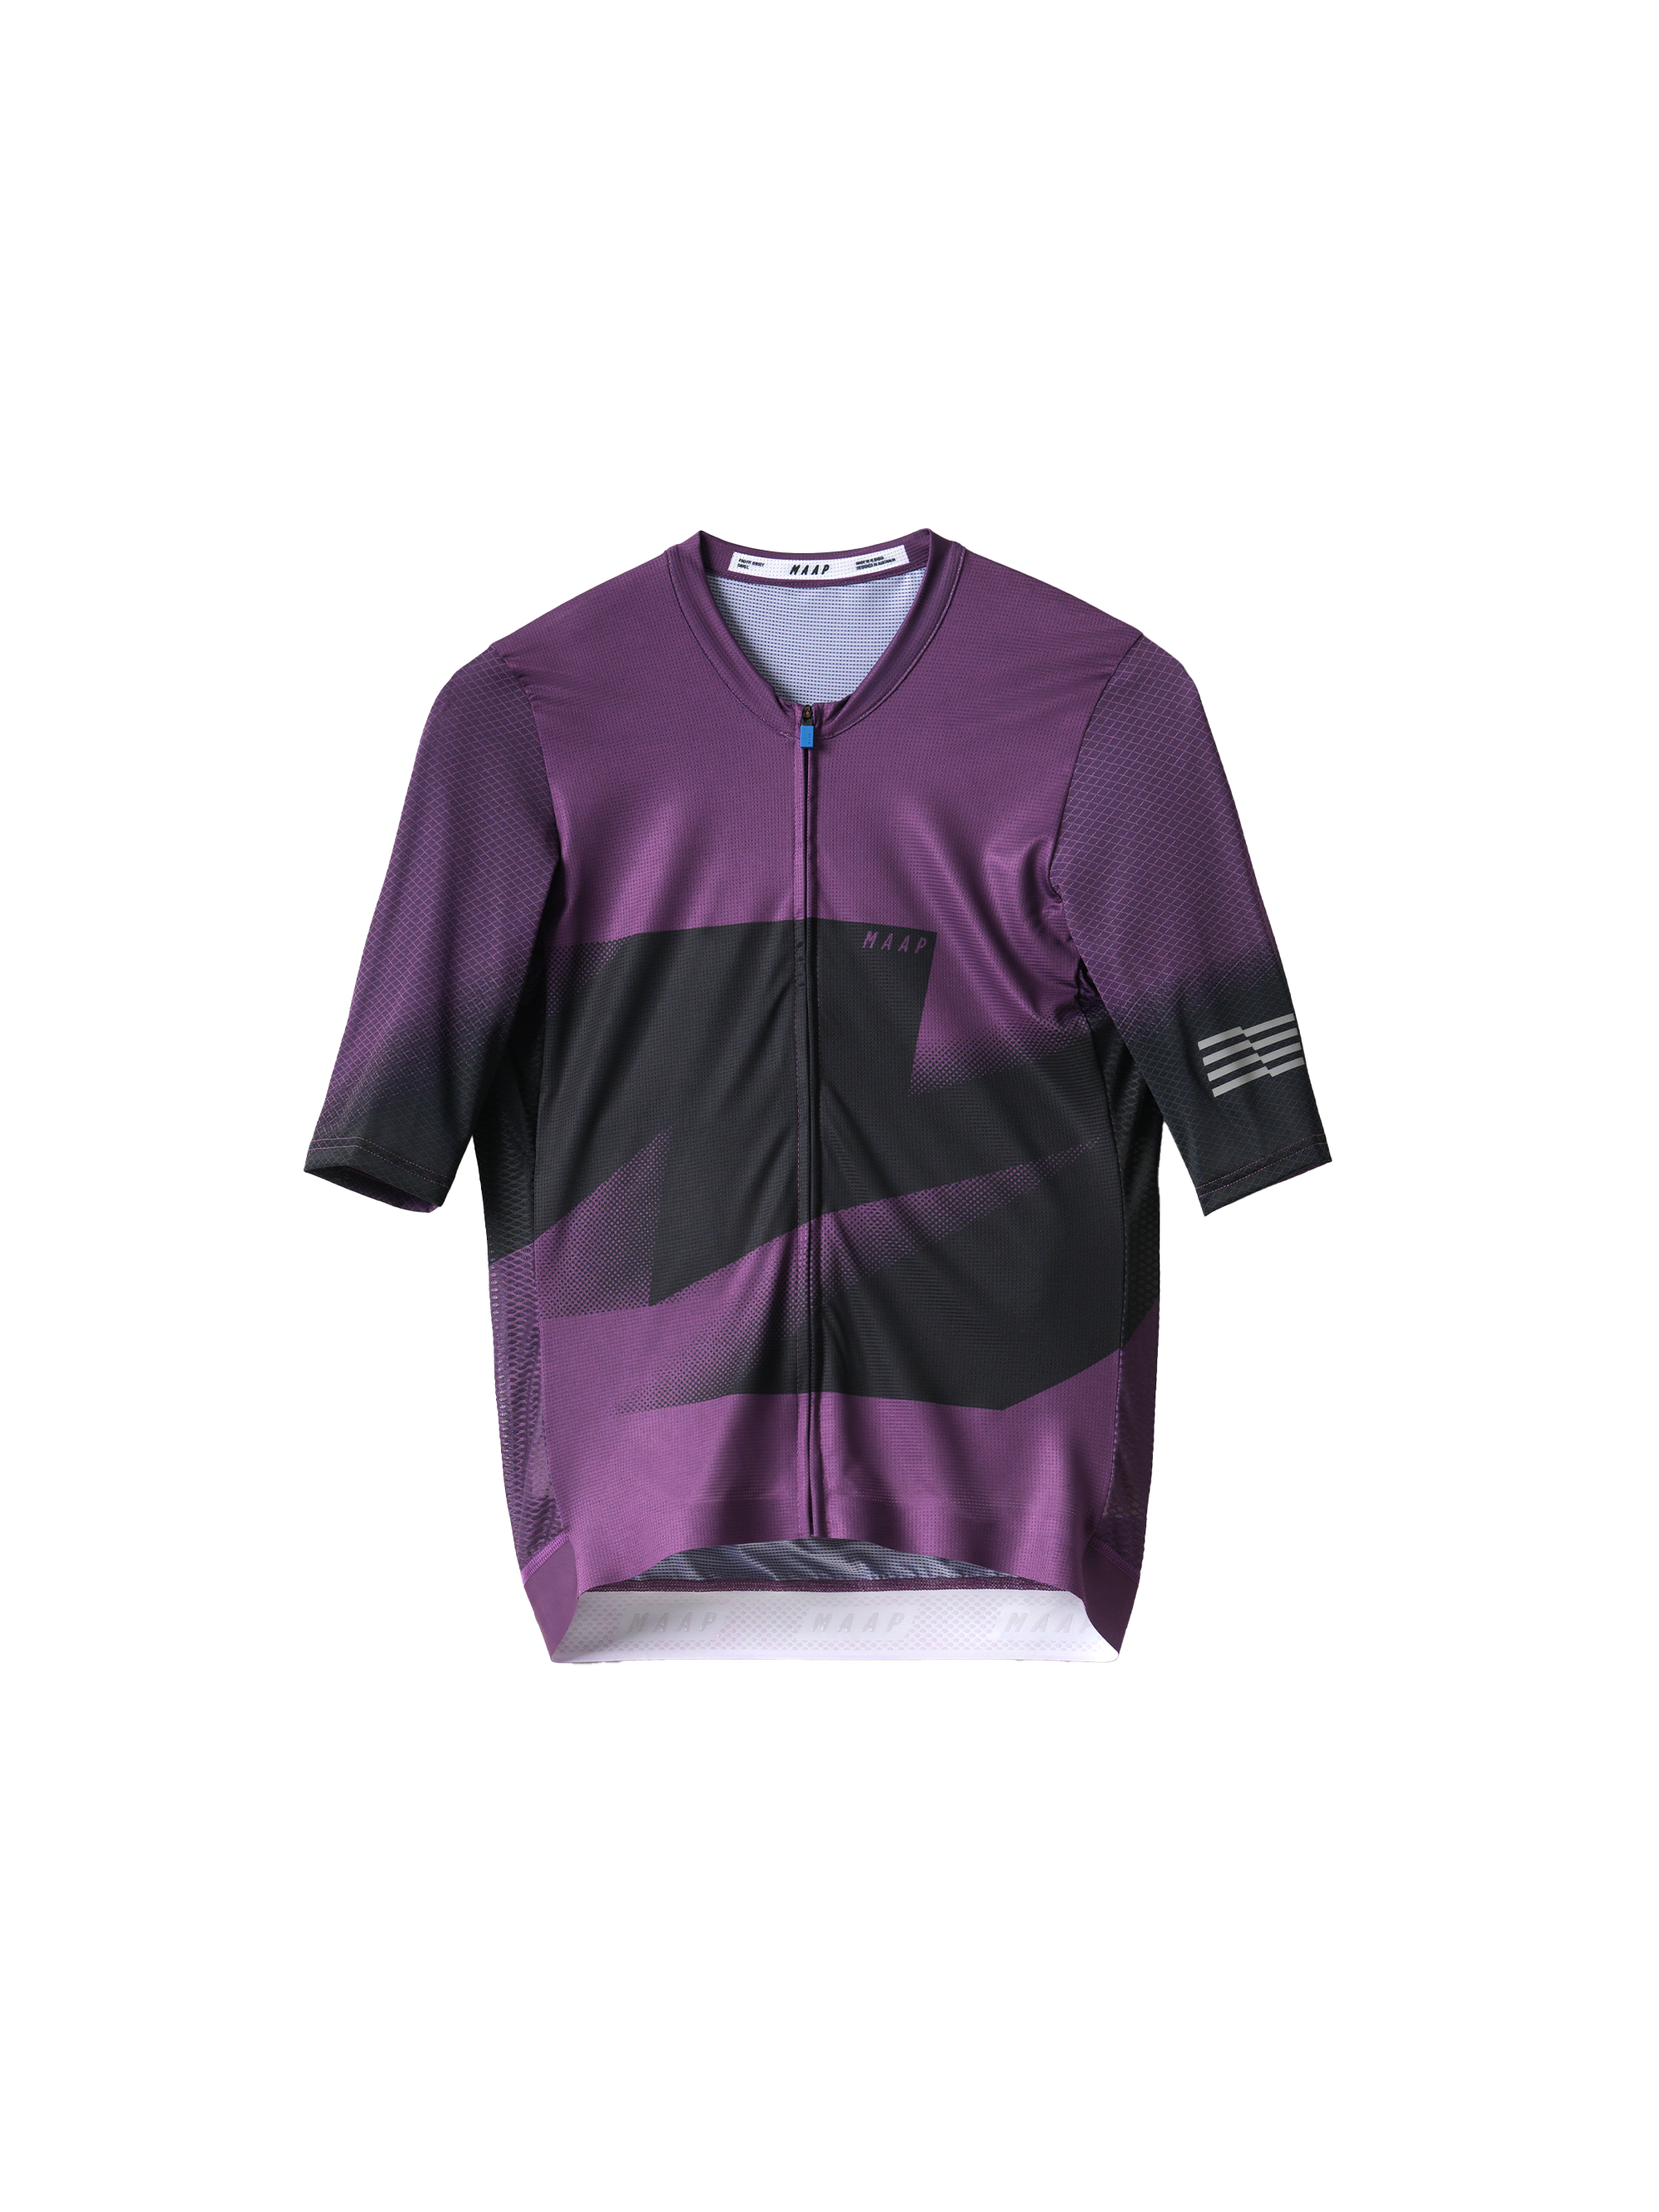 Evolve Pro Air Jersey 2.0 - MAAP Cycling Apparel